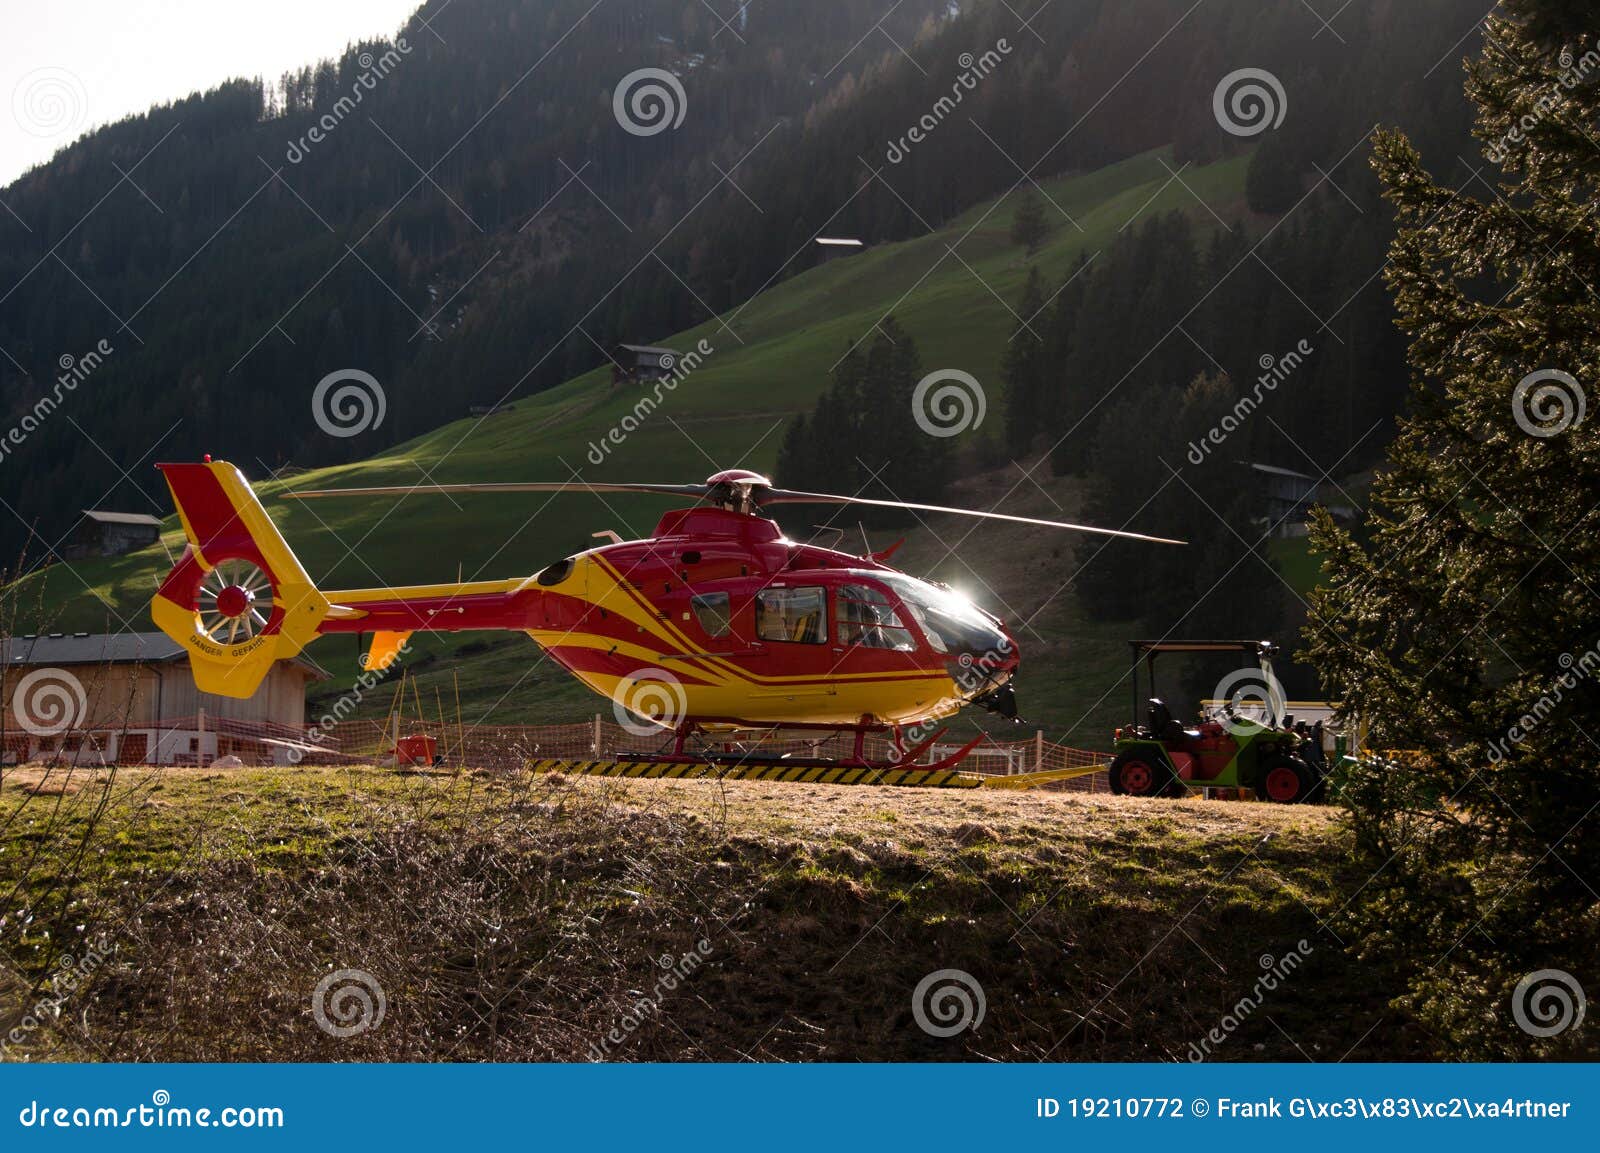  - grounded-yellow-red-helicopter-hangar-19210772